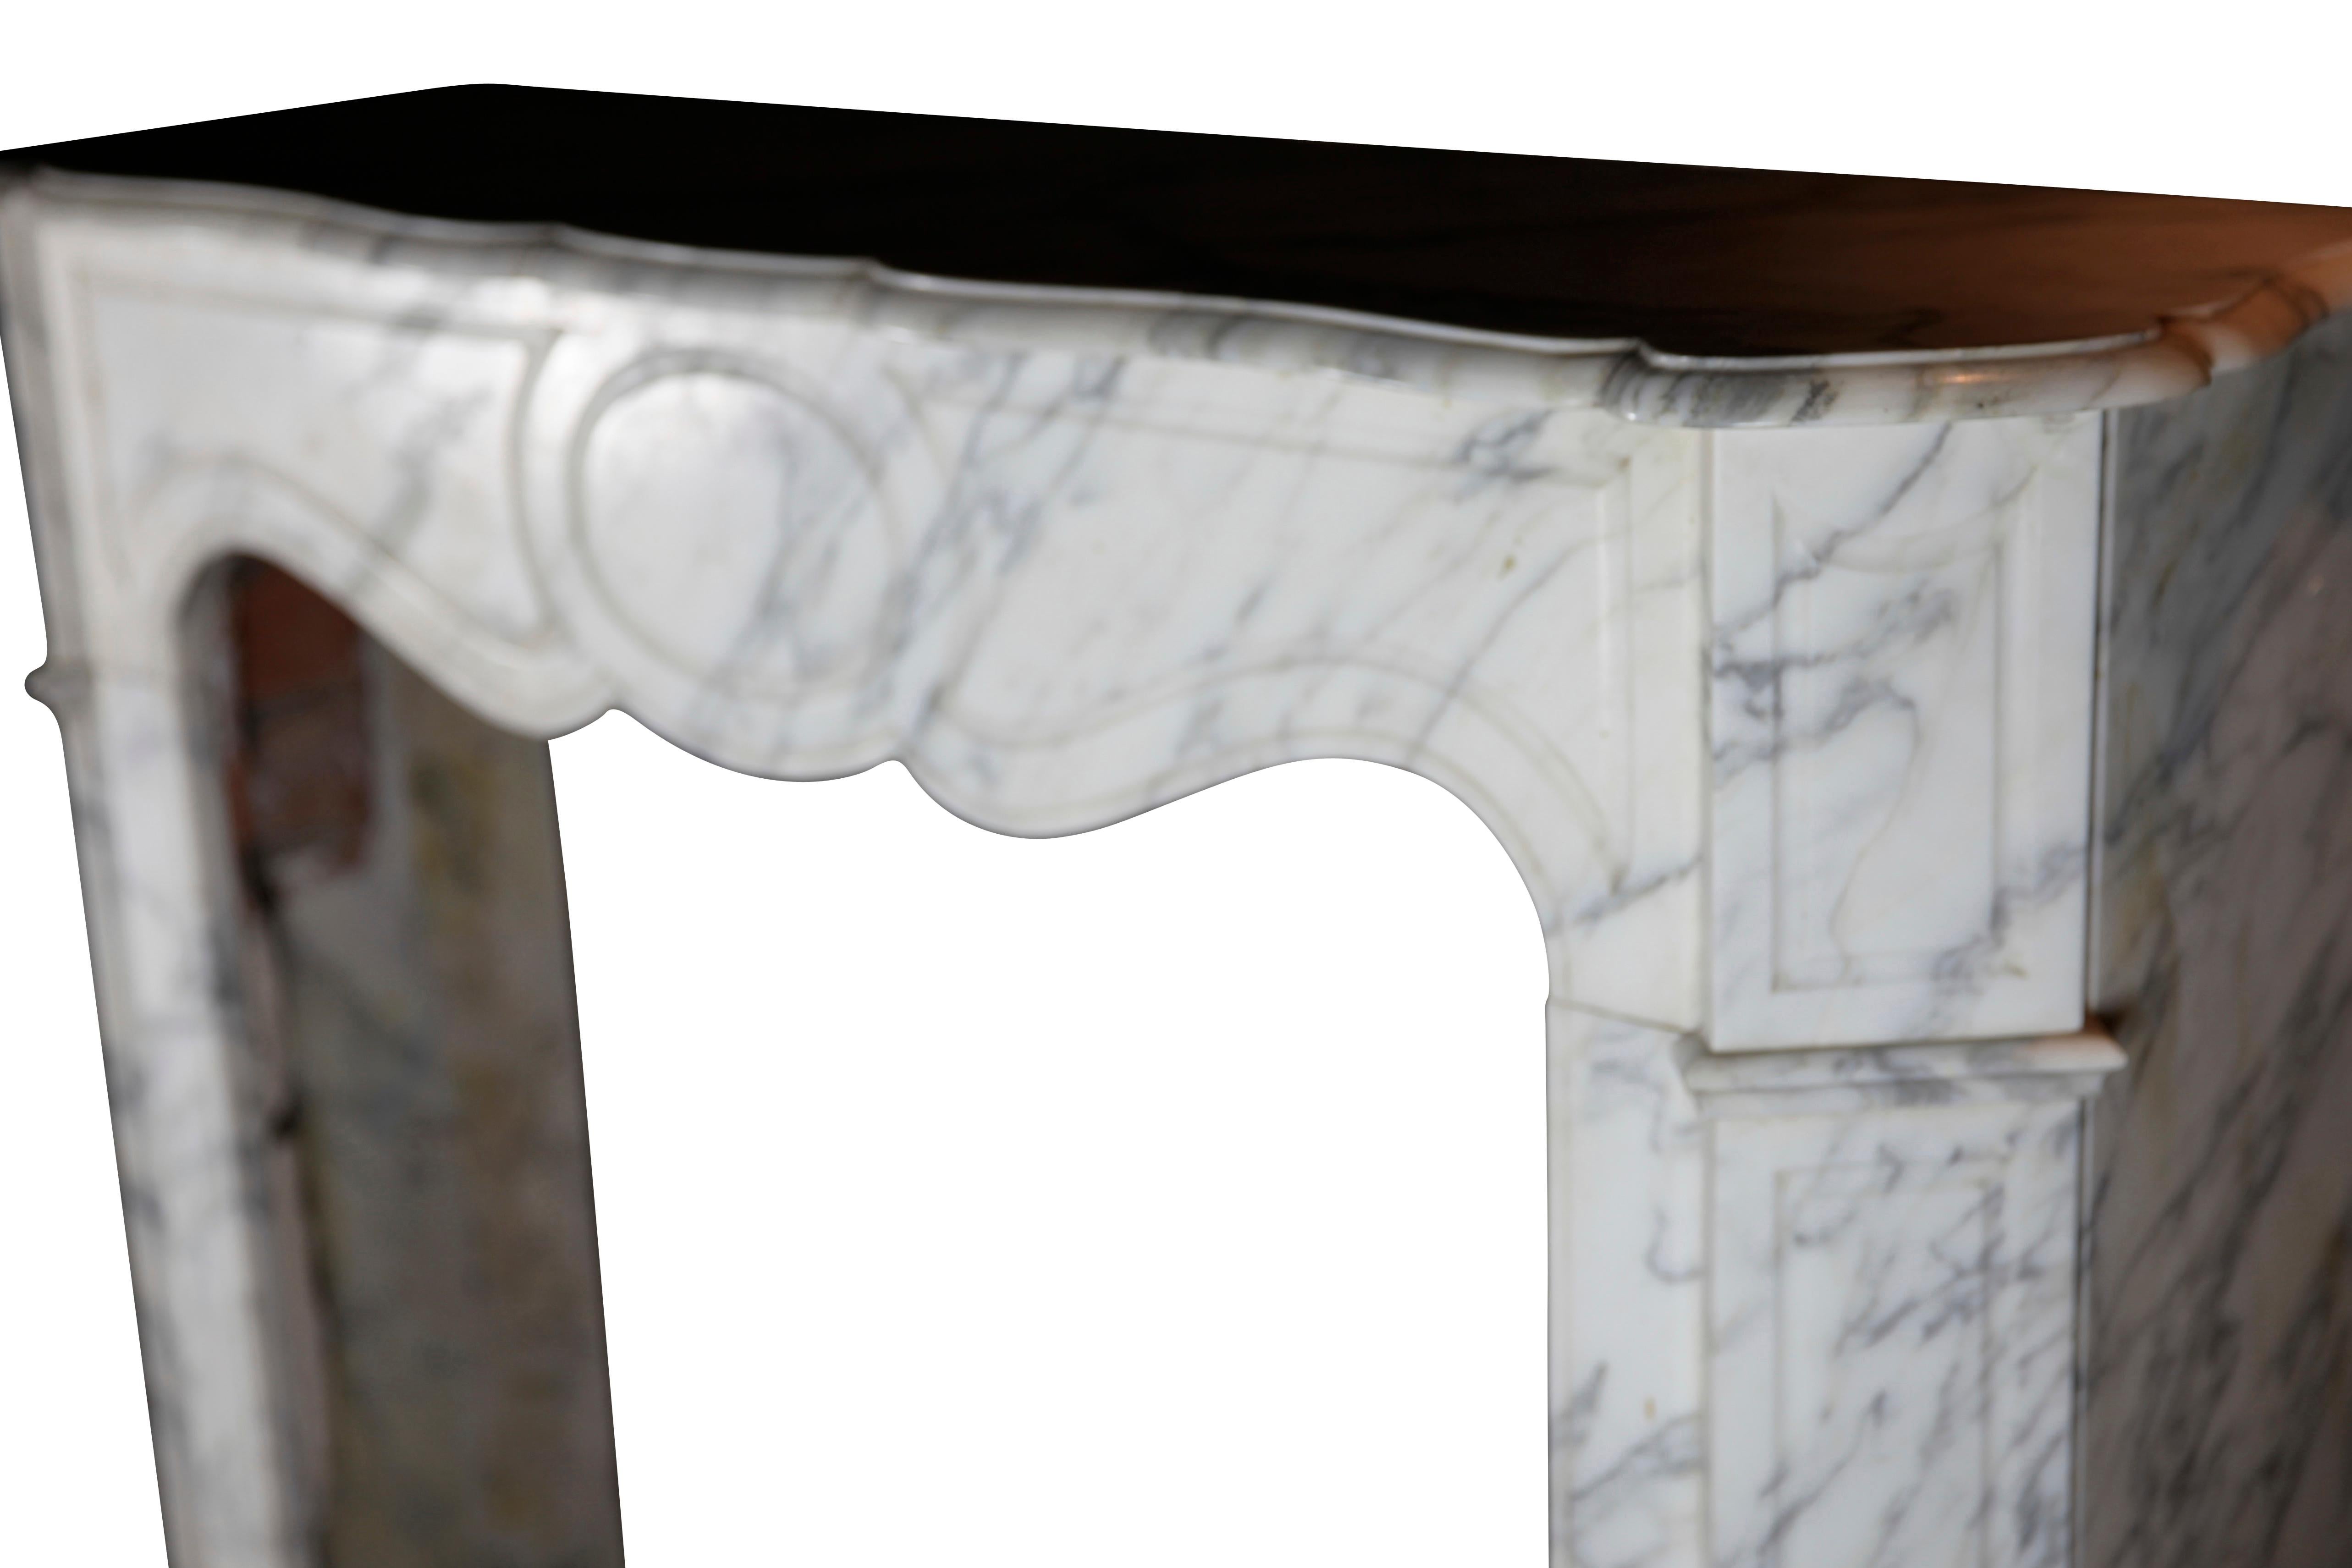 A original fine French Carrara marble vintage fireplace mantle which has no restoration. The Pompadour style was the perfect bedroom style in the 19th century.
Measures:
104 cm exterior width 40.94 inch
102 cm exterior height 40.16 inch
69 cm